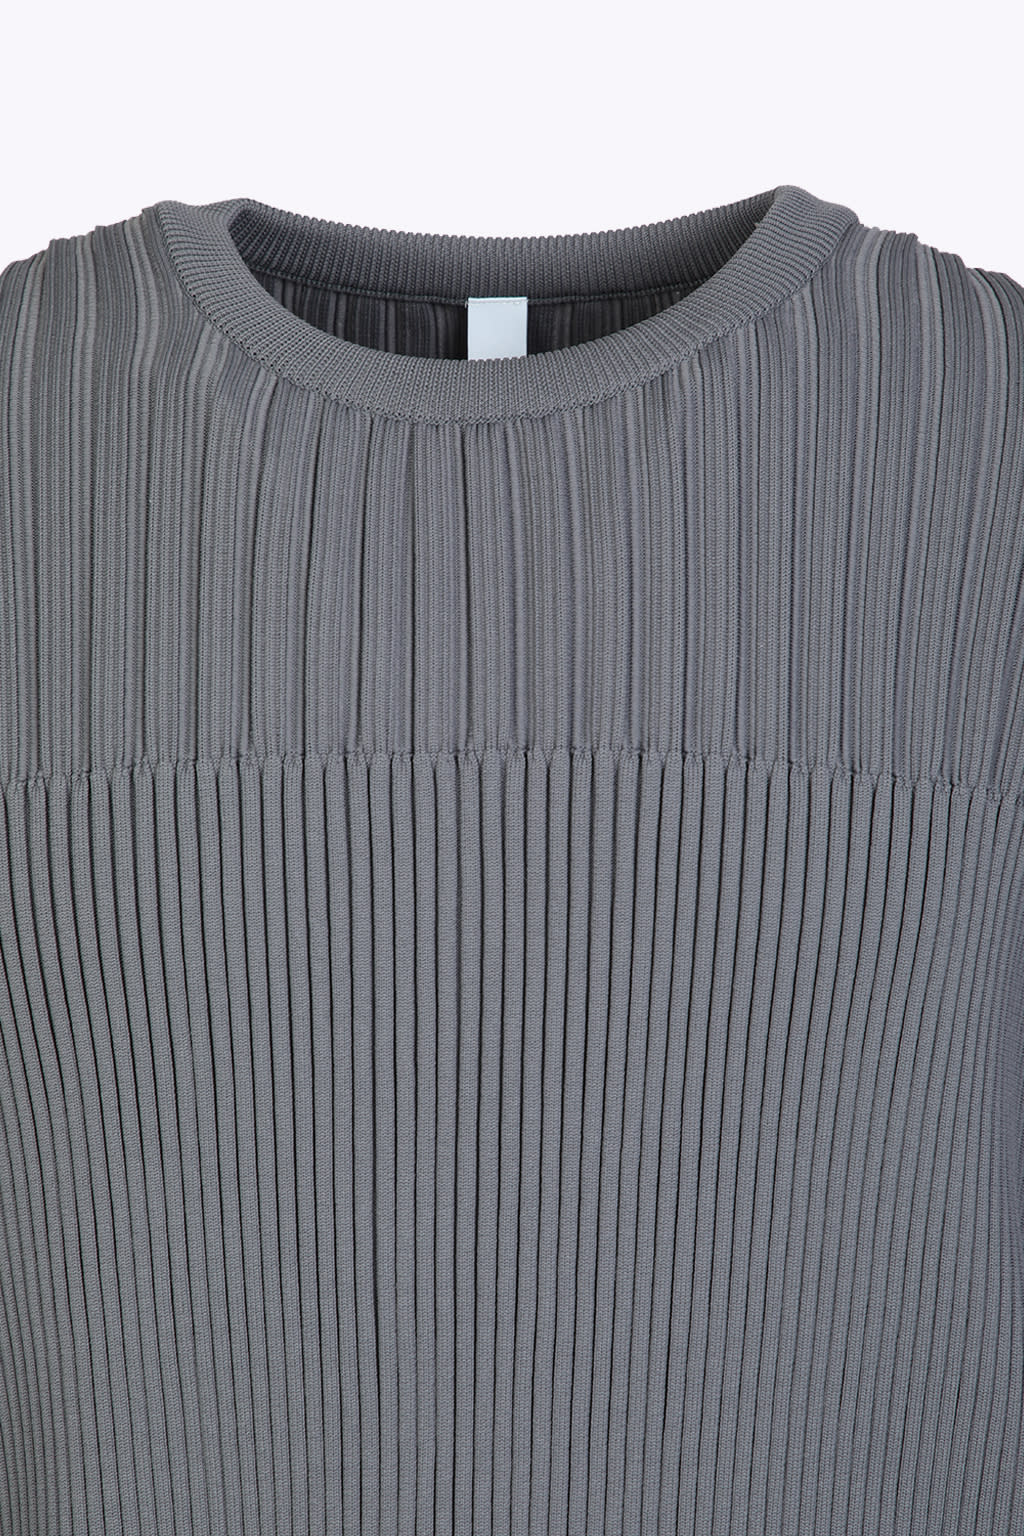 Cfcl Fluted Top 3 Grey Rib-knitted Curled Top - Fluted Top In